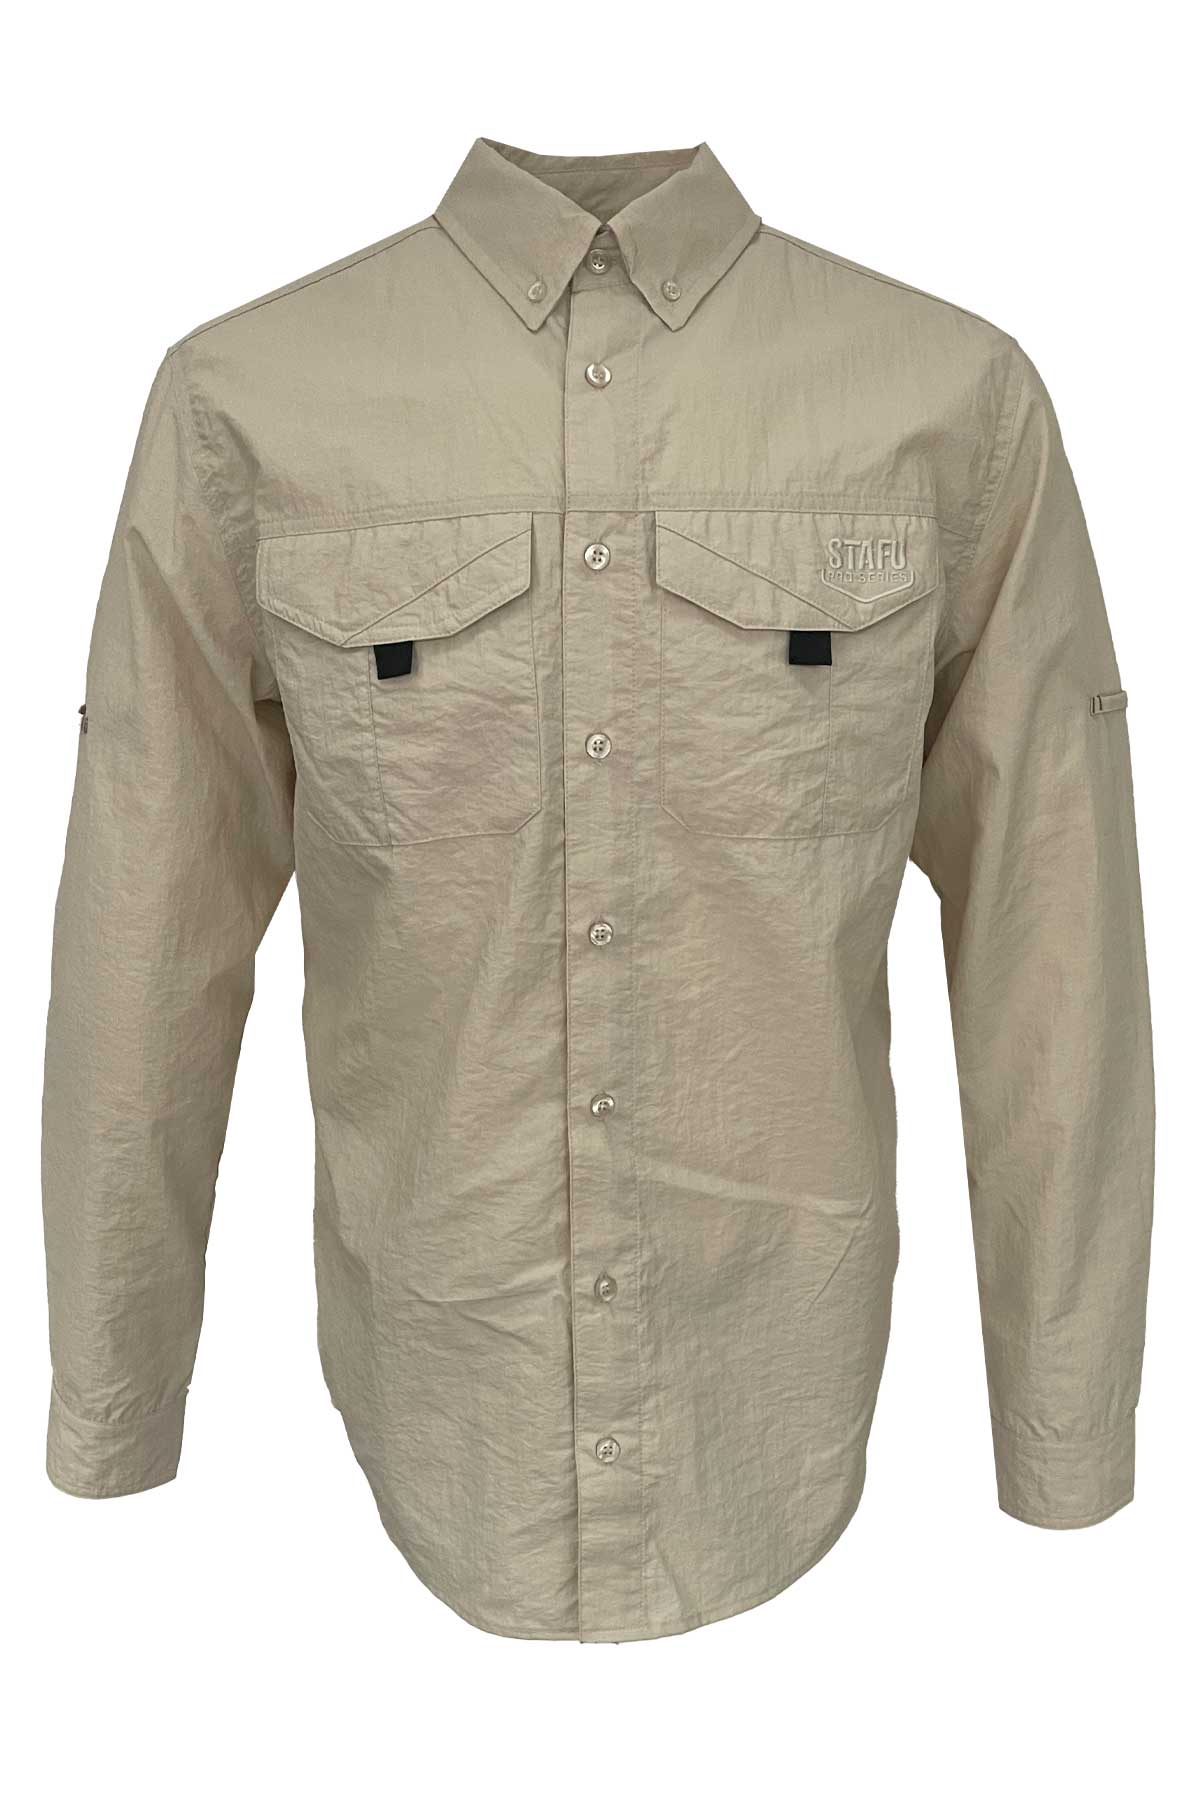 Eclipse Men's Long Sleeve Perforated Fisherman Sailor Beige Button-Up Shirt